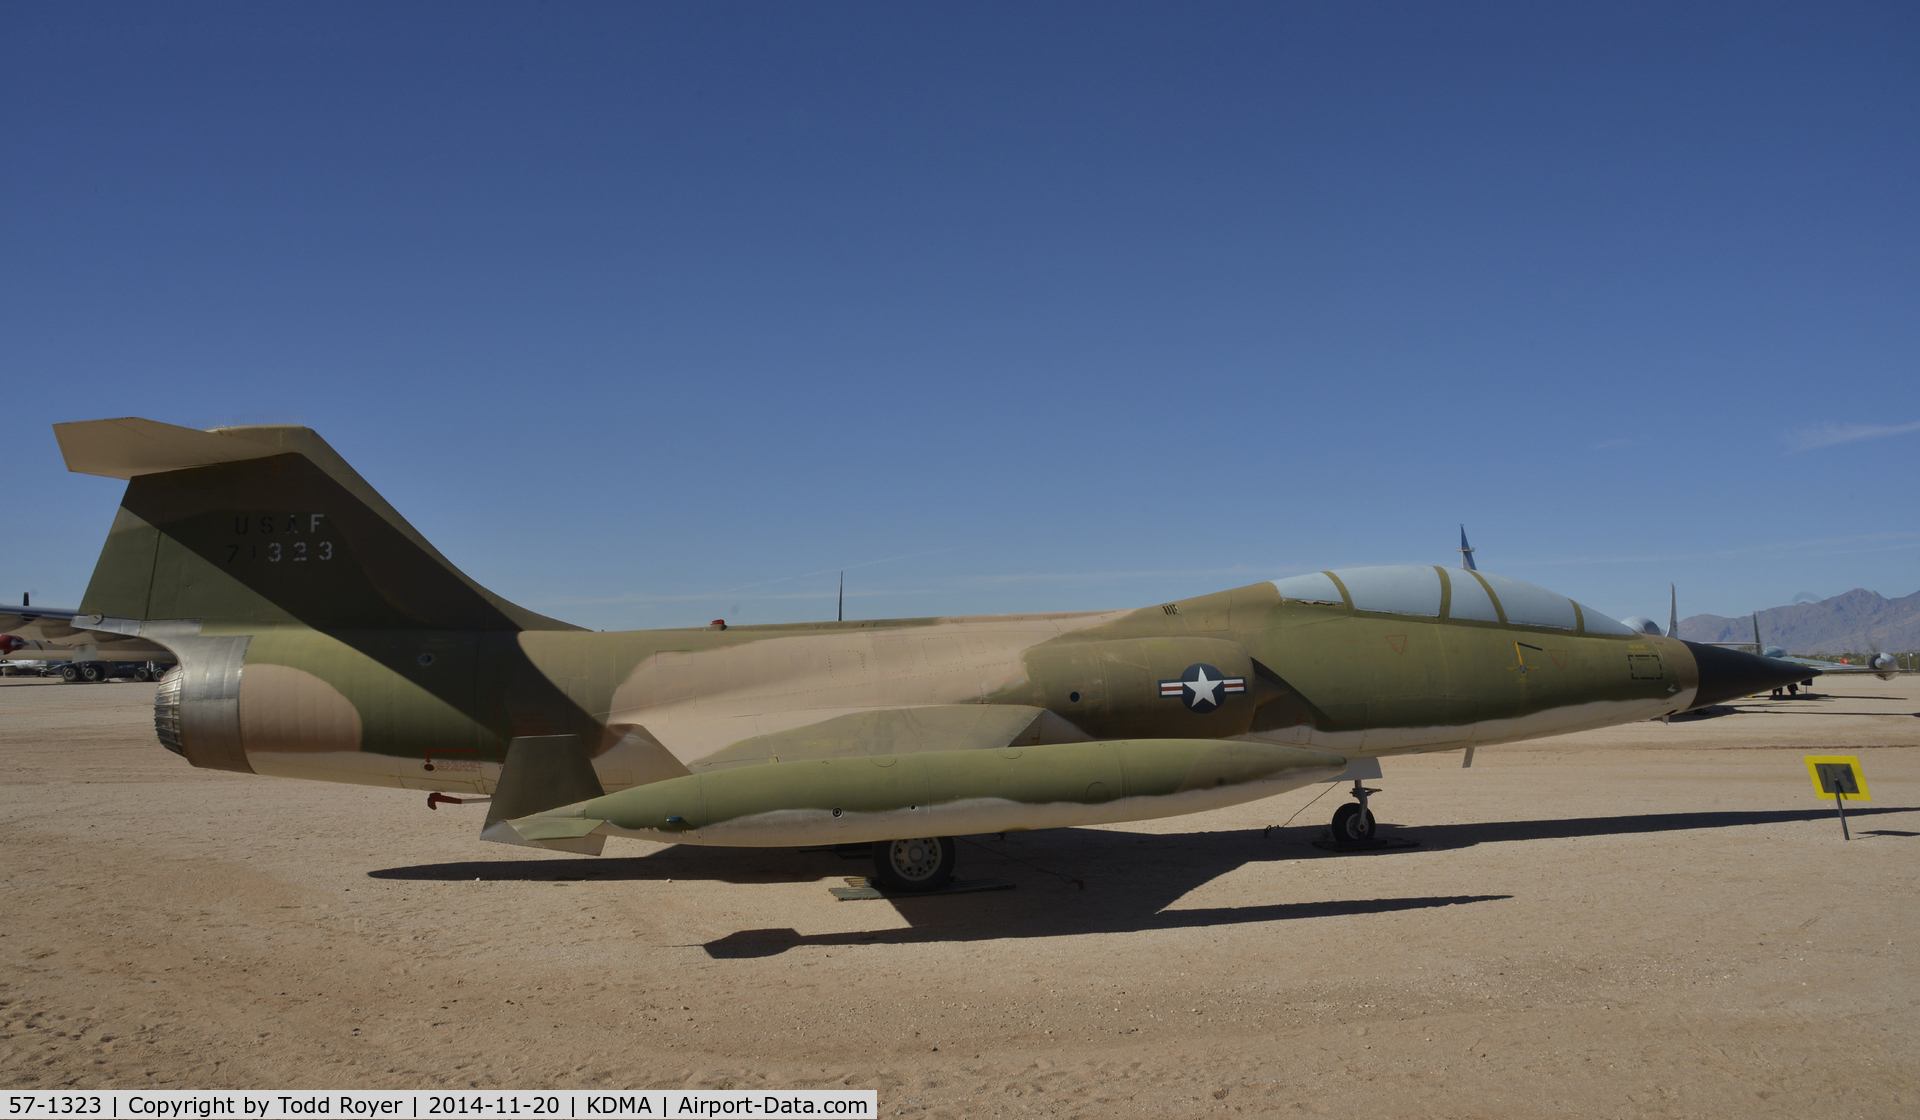 57-1323, 1957 Lockheed F-104D Starfighter C/N 483-5035, On Display at the Pima Air and Space Museum